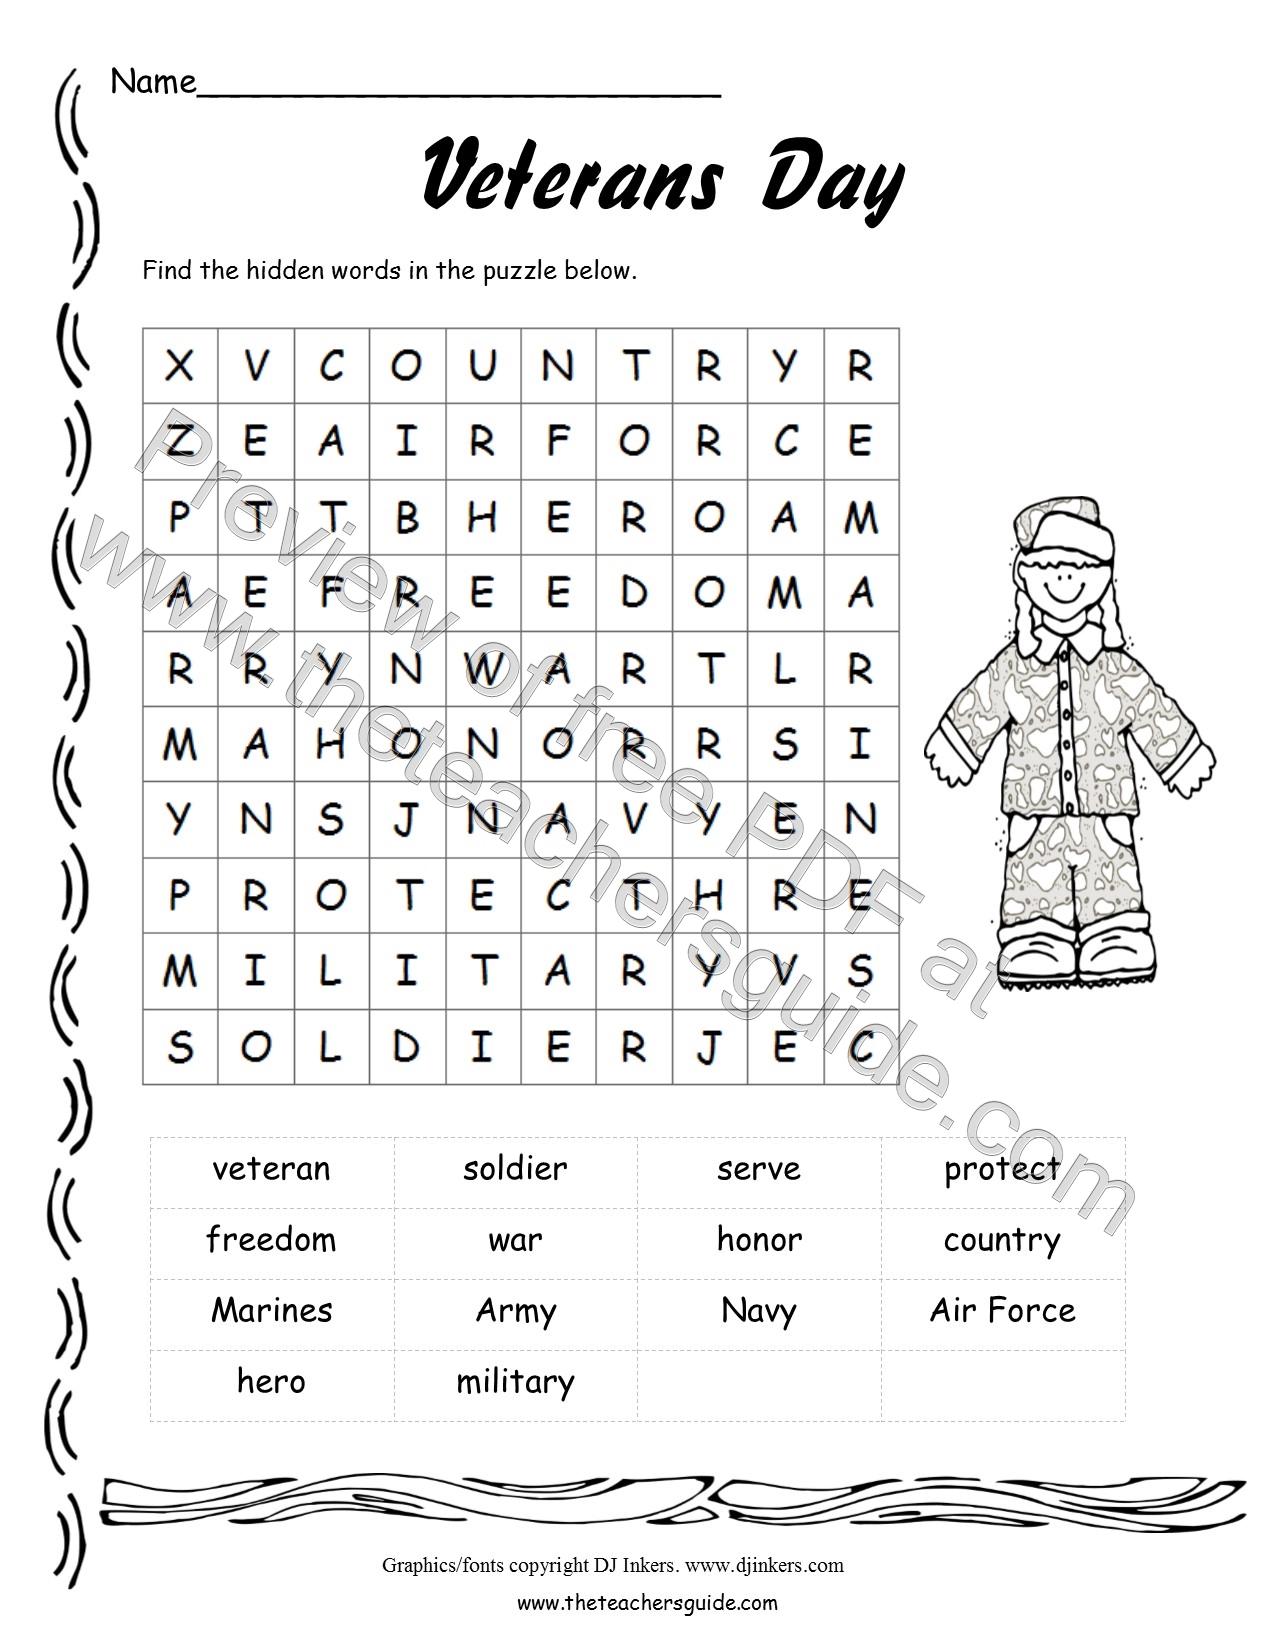 free-printable-veterans-day-activities-for-students-printable-templates